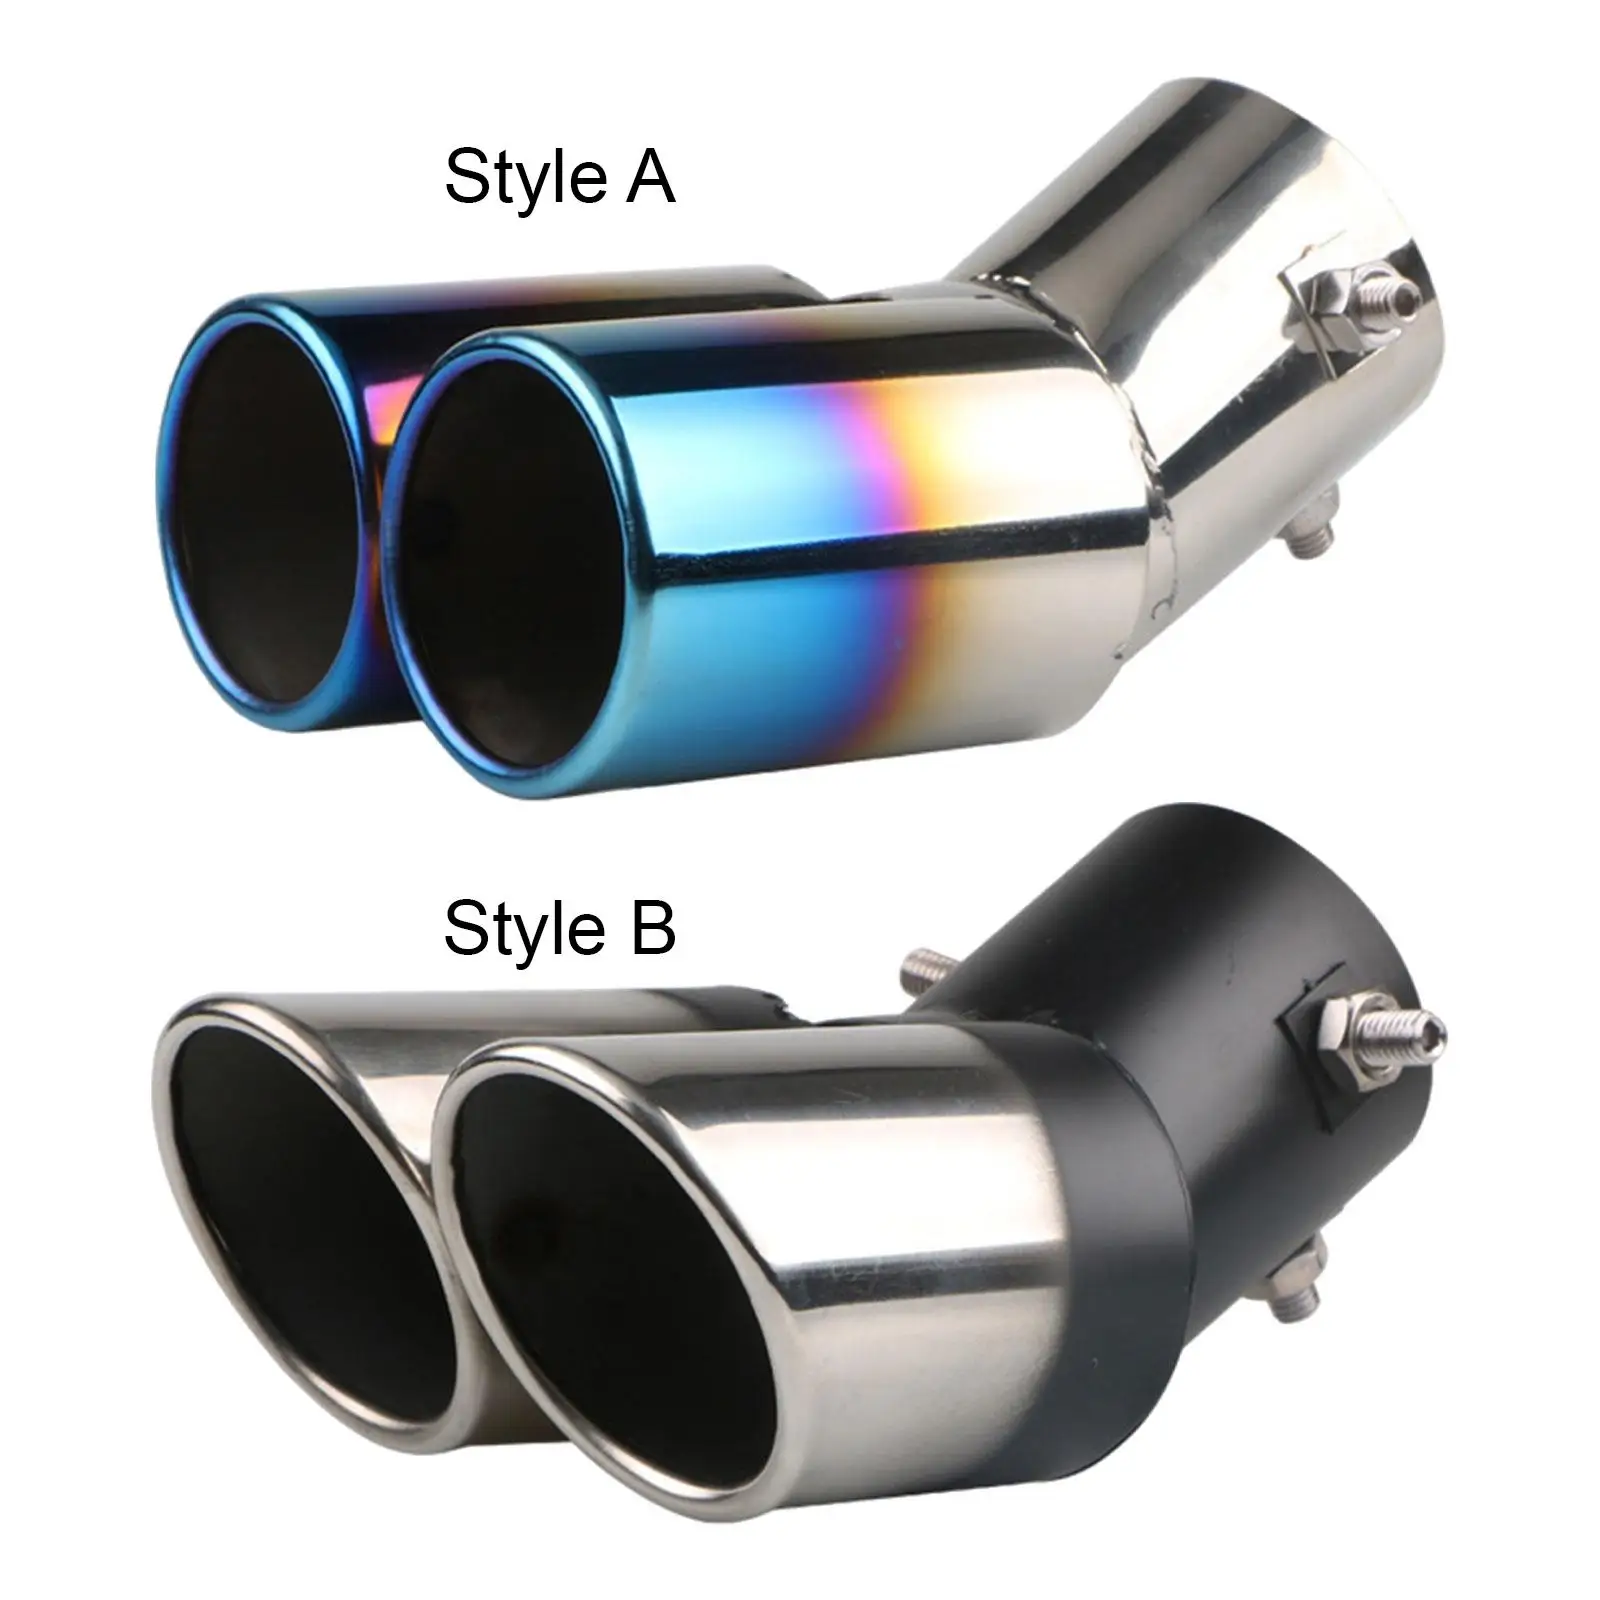 Car Dual Exhaust Tip Tail Pipe Professional Stainless Steel Premium Replace Parts Car Modification Accessory Exhaust Tail Throat